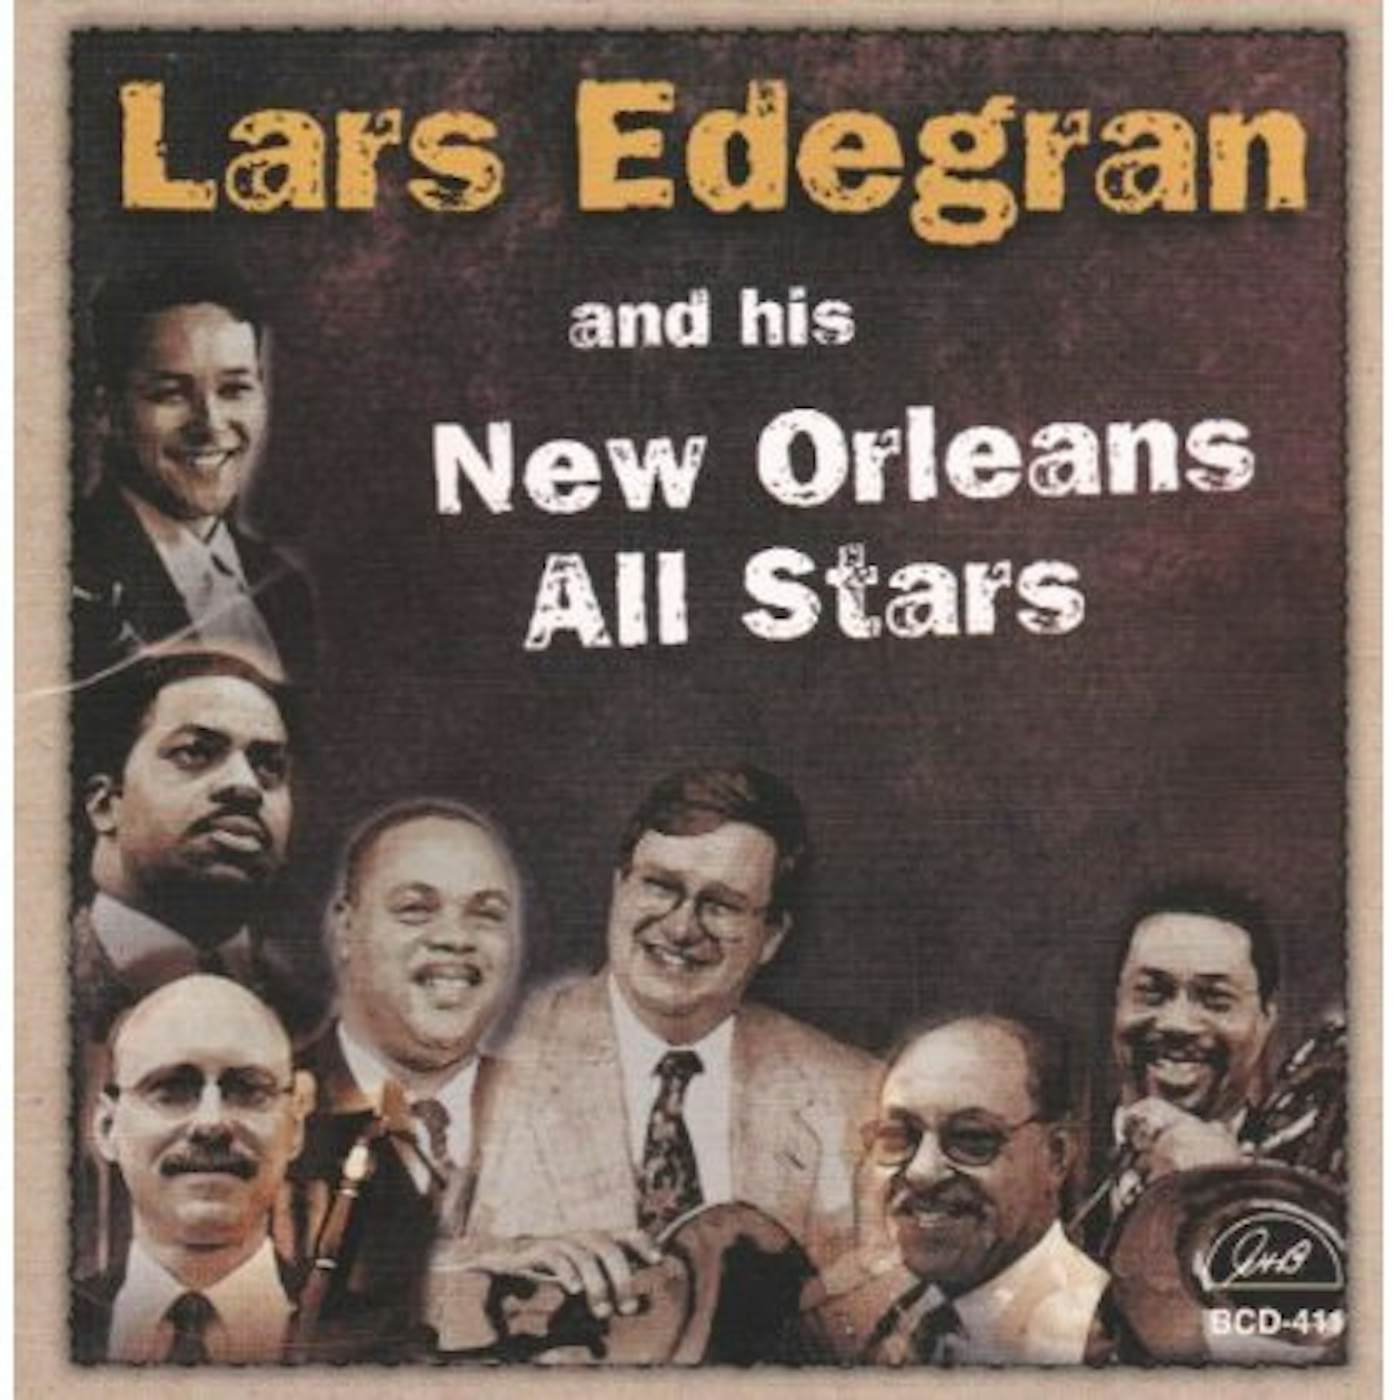 LARS EDEGRAN AND HIS NEW ORLEANS ALL STARS CD